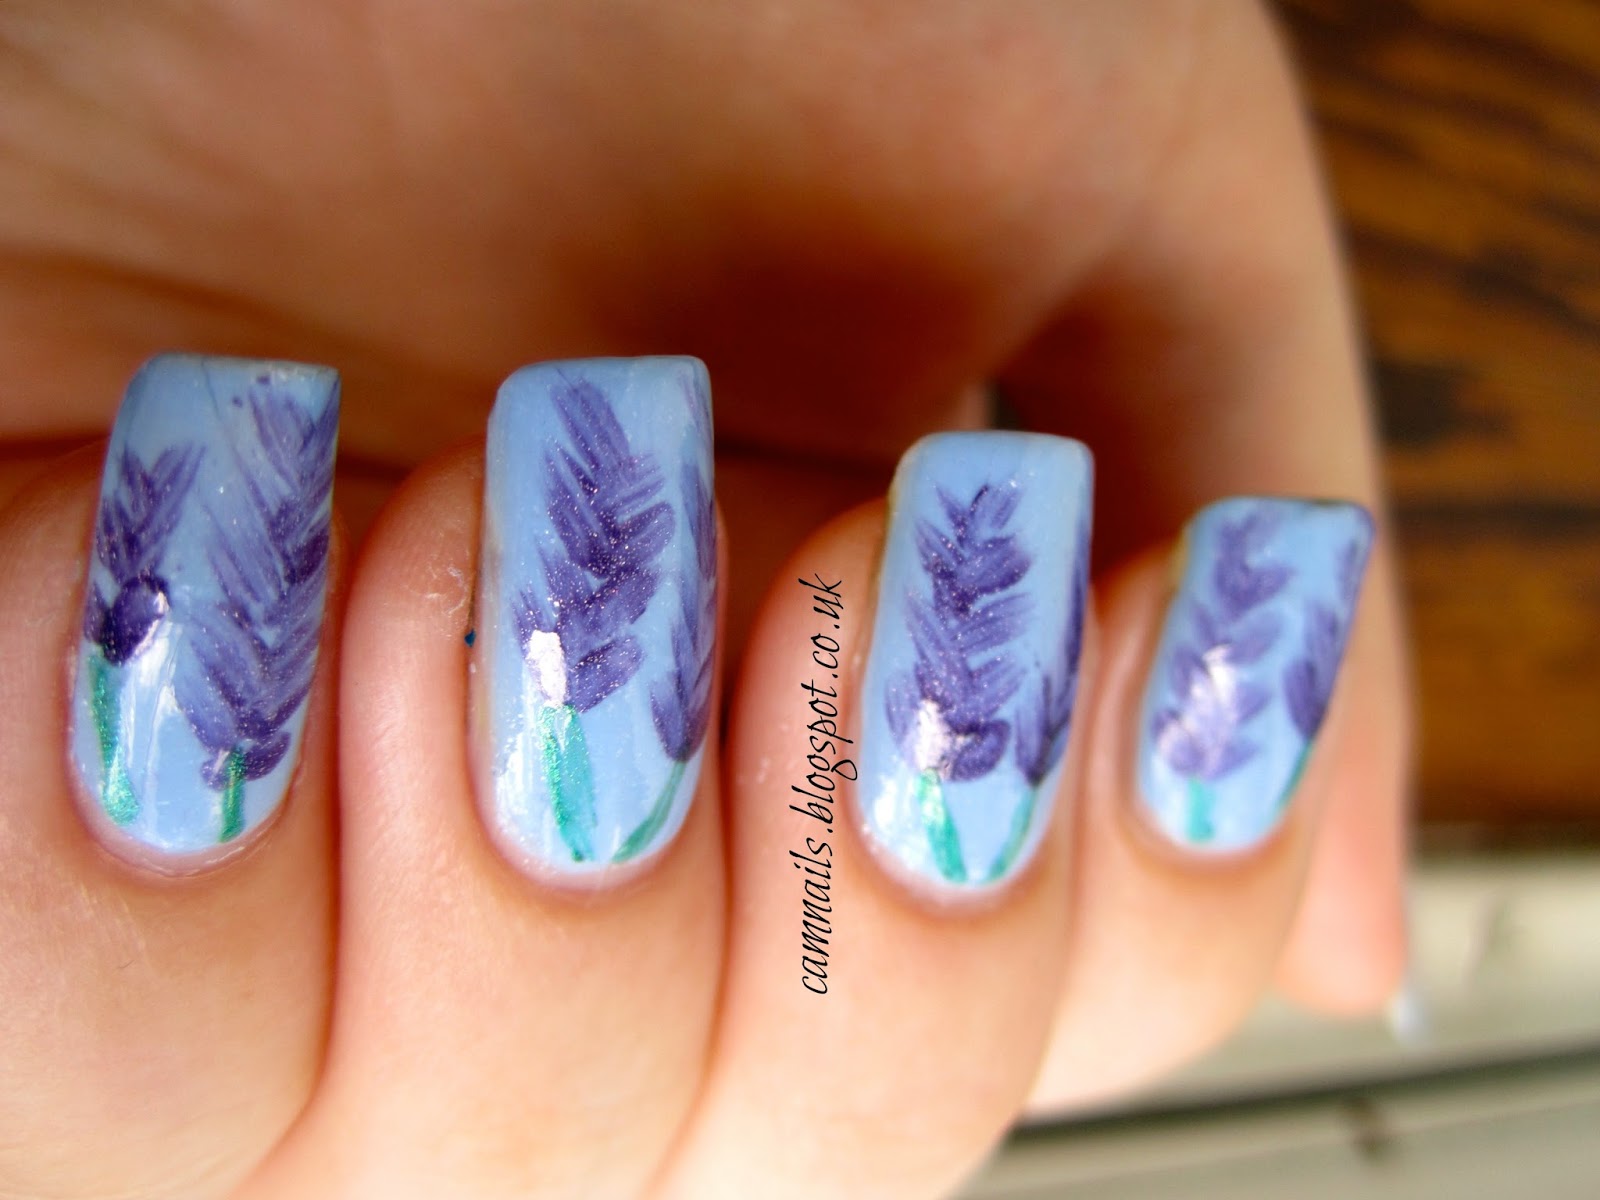 3. Lavender Nail Designs for Short Nails - wide 1